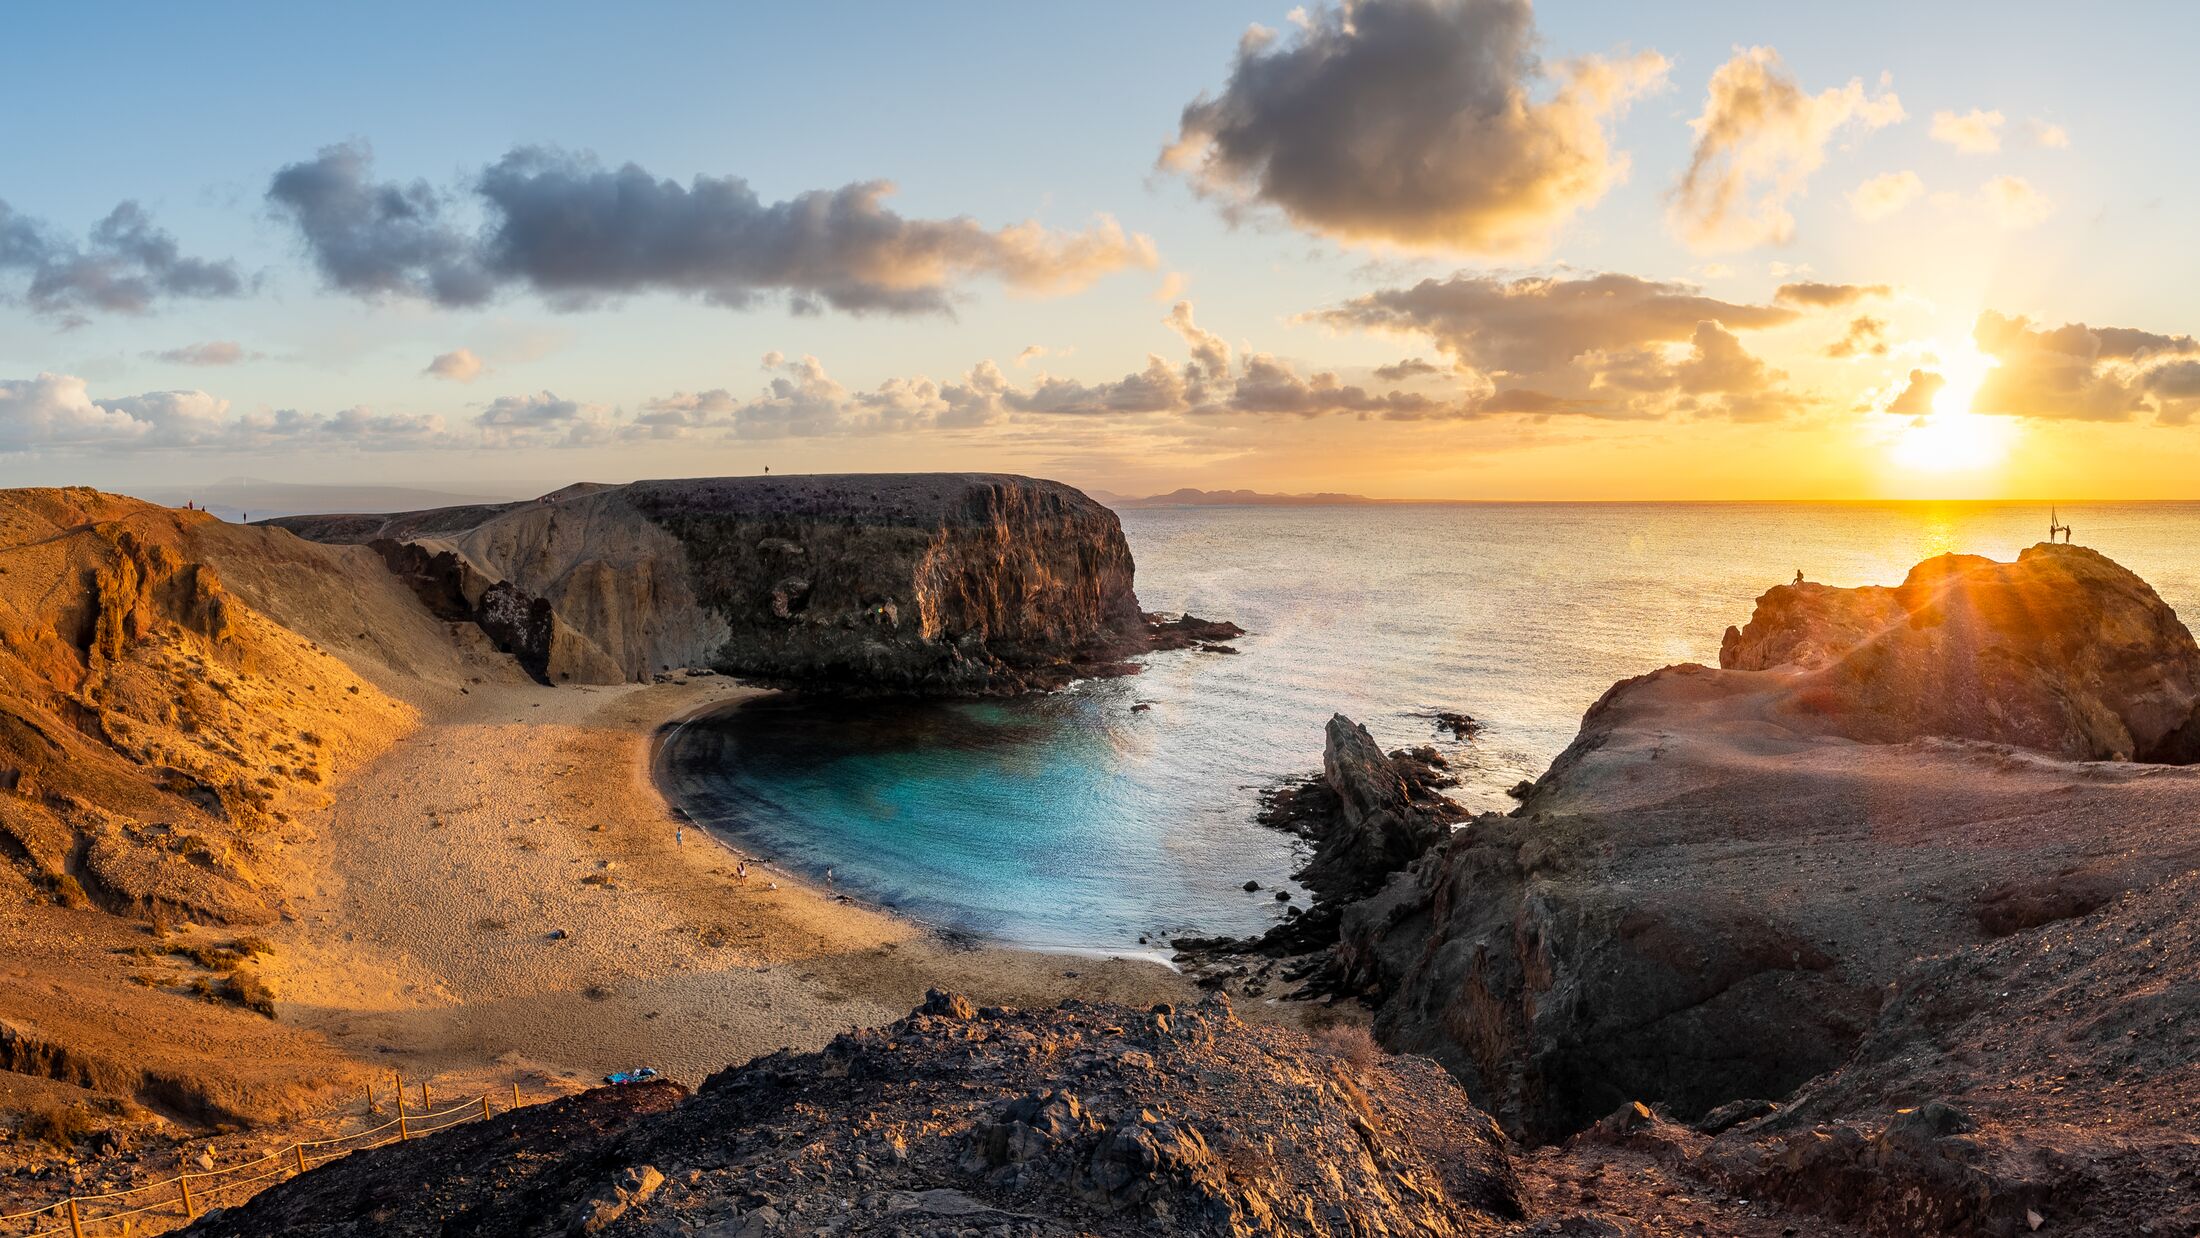 Landscape with Papagayo beach at sunset, Lanzarote, Canary Islands, Spain